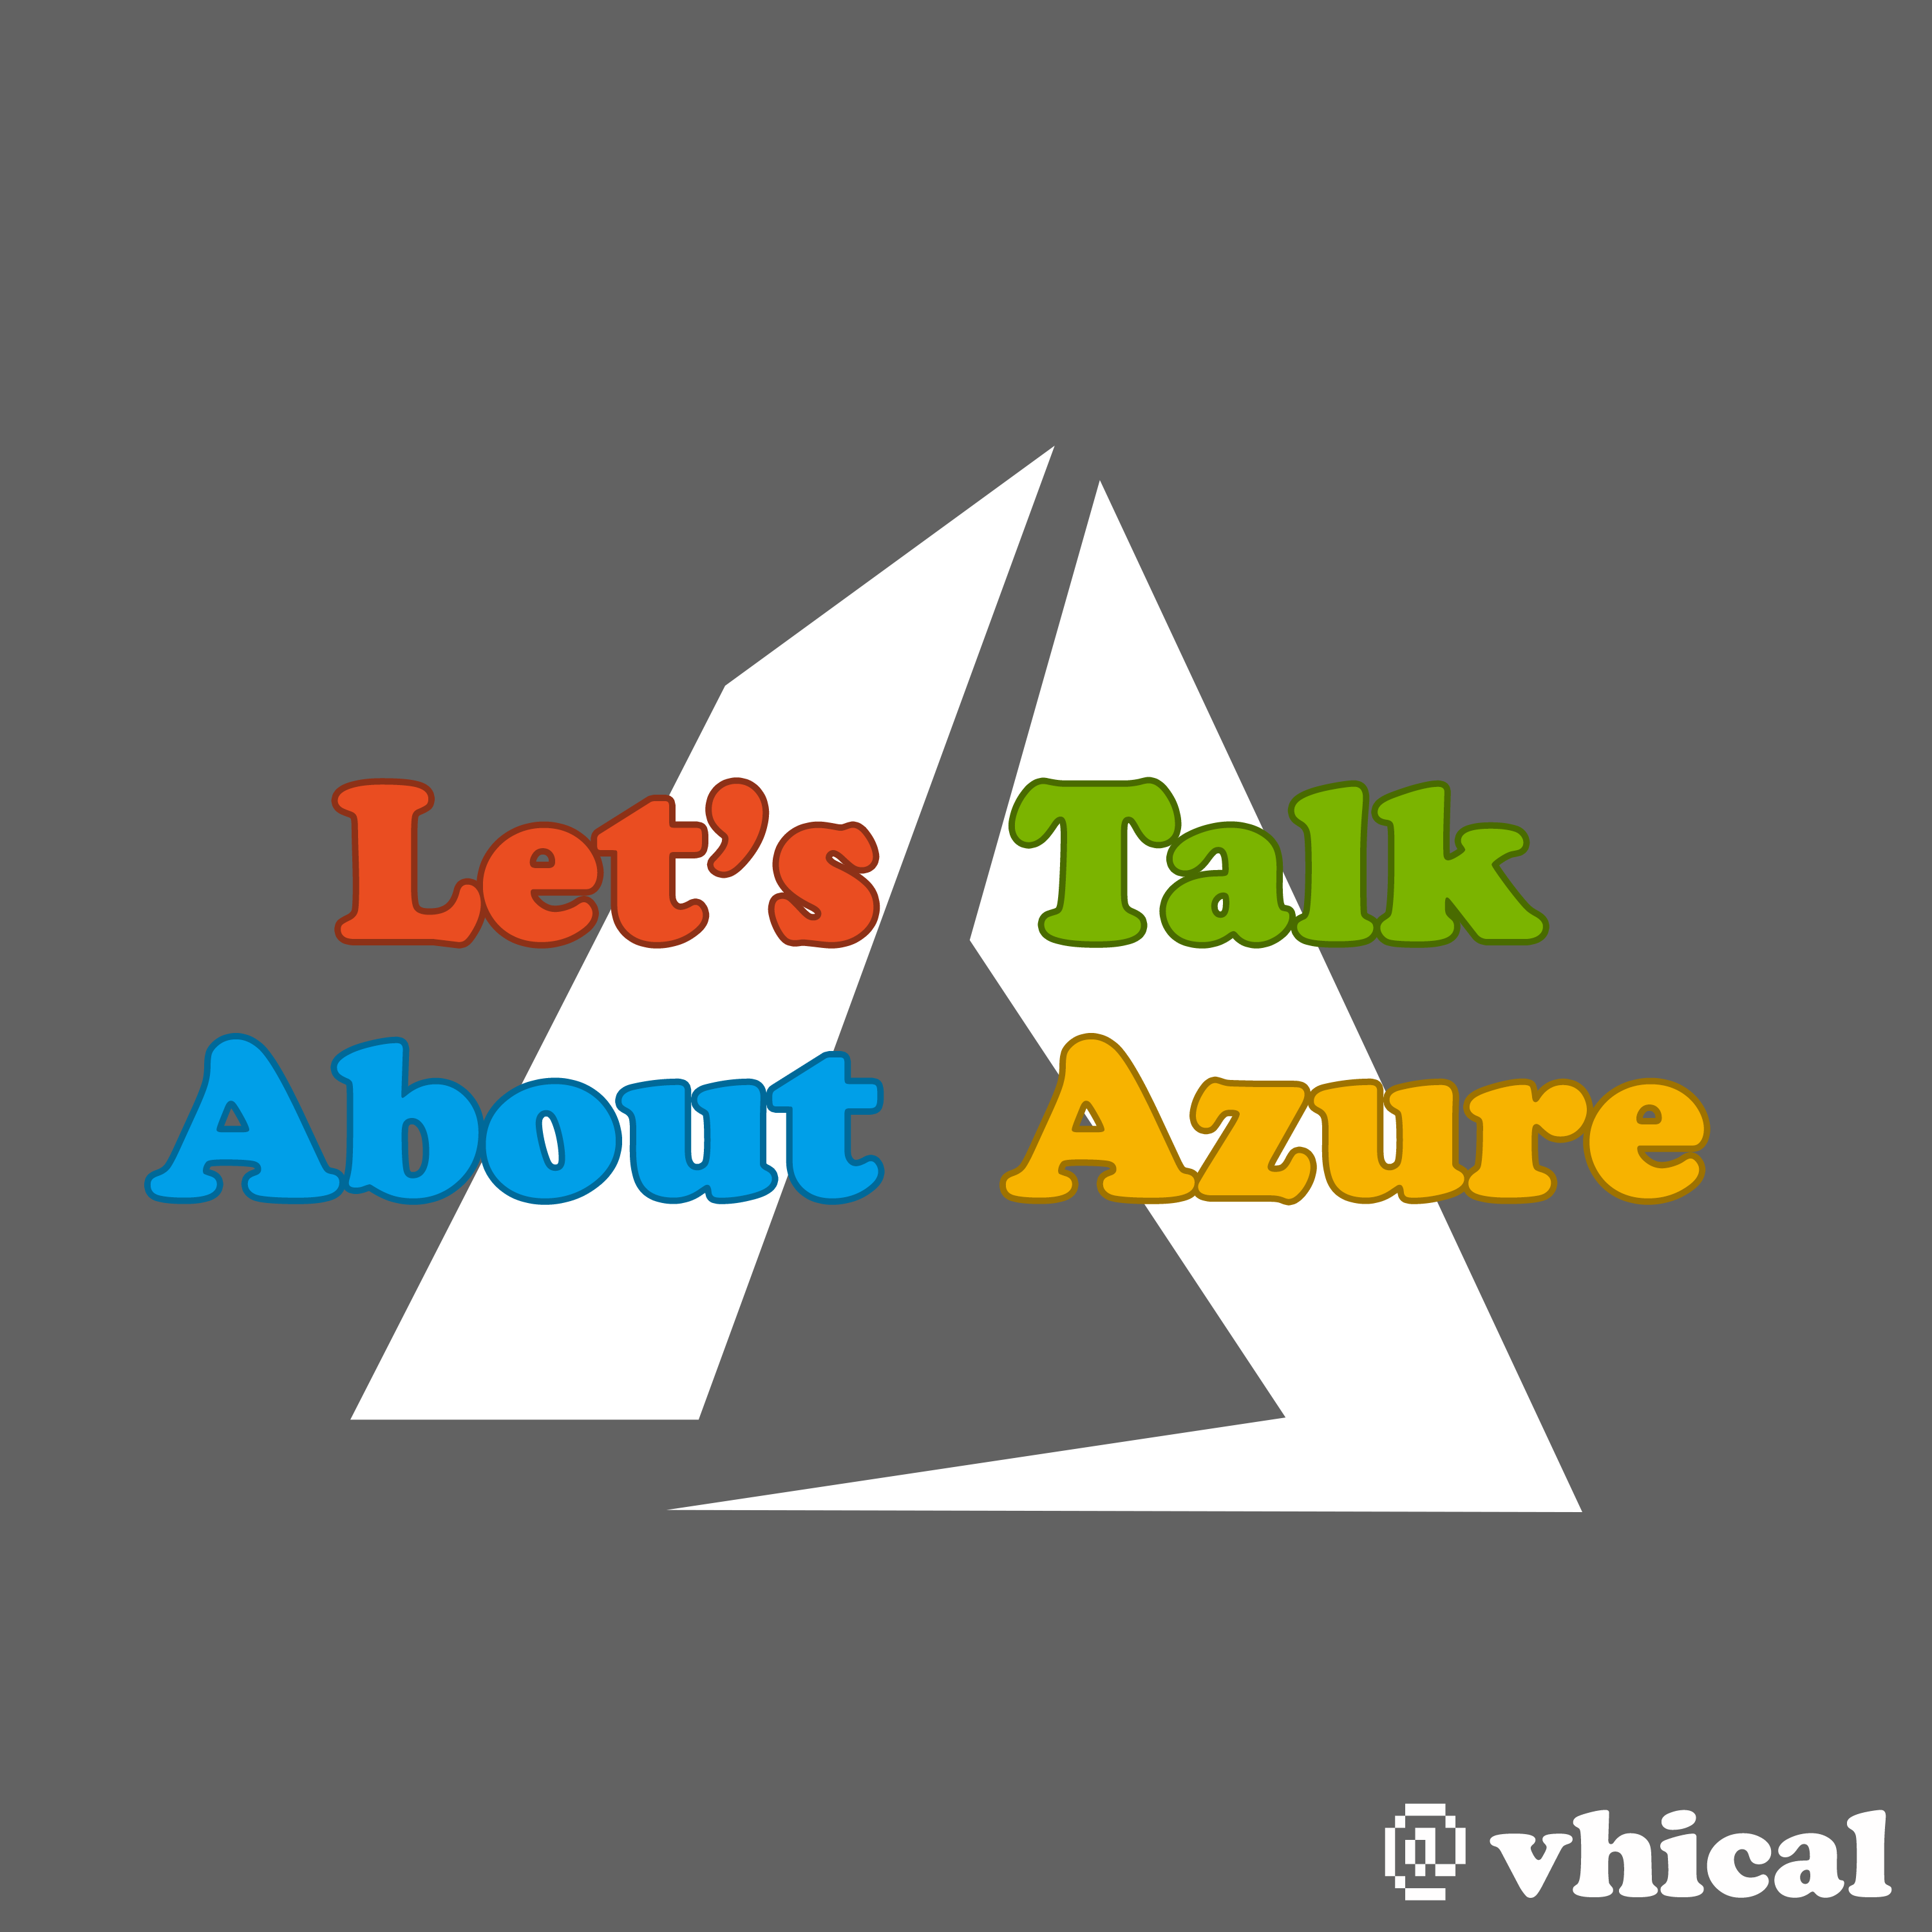 Azure logo with text that says Let's talk about Azure colored like the Microsoft logo